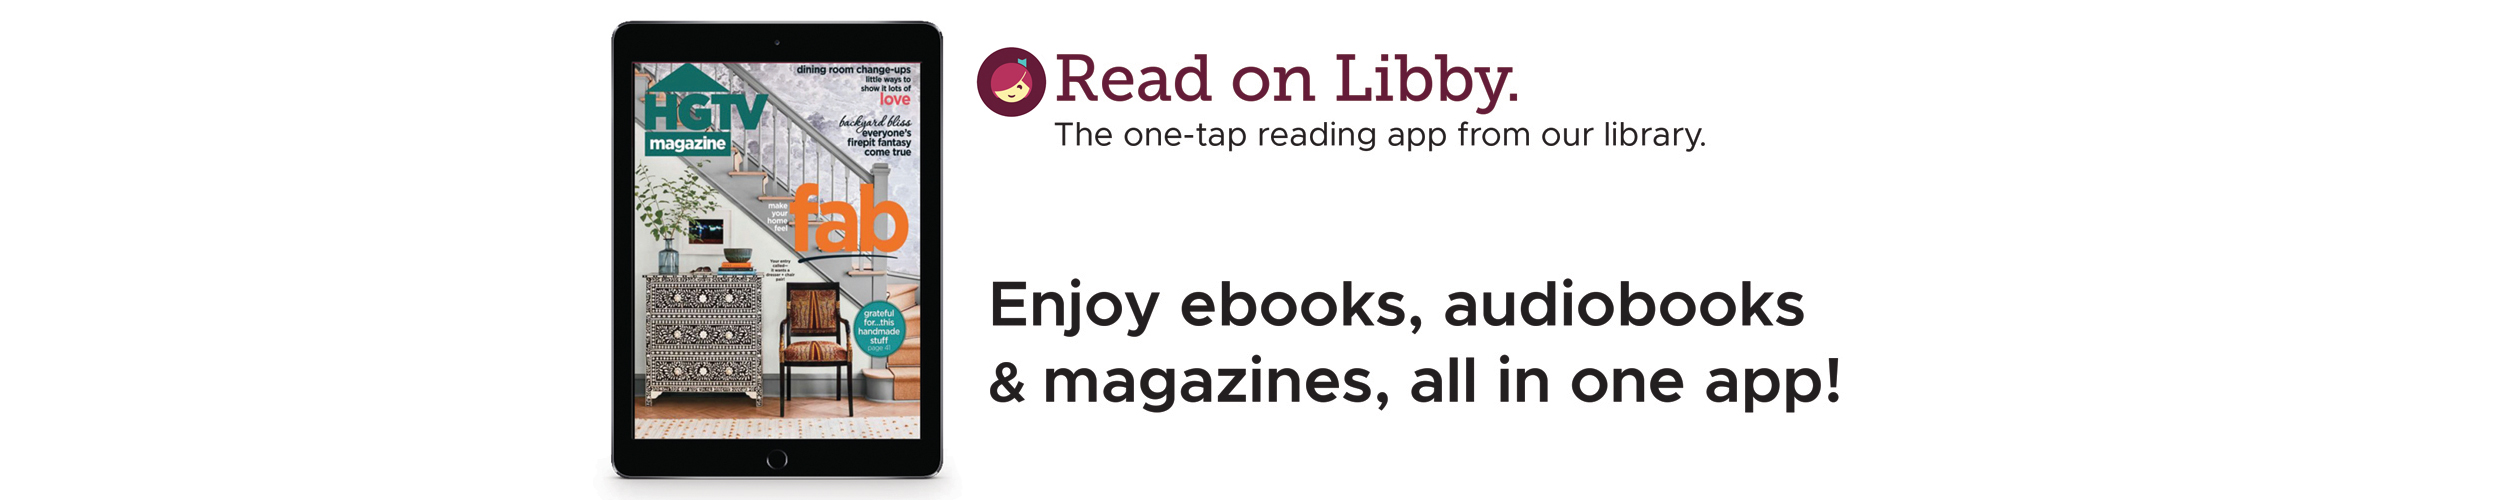 tablet with emagazine displayed "Read on Libby"